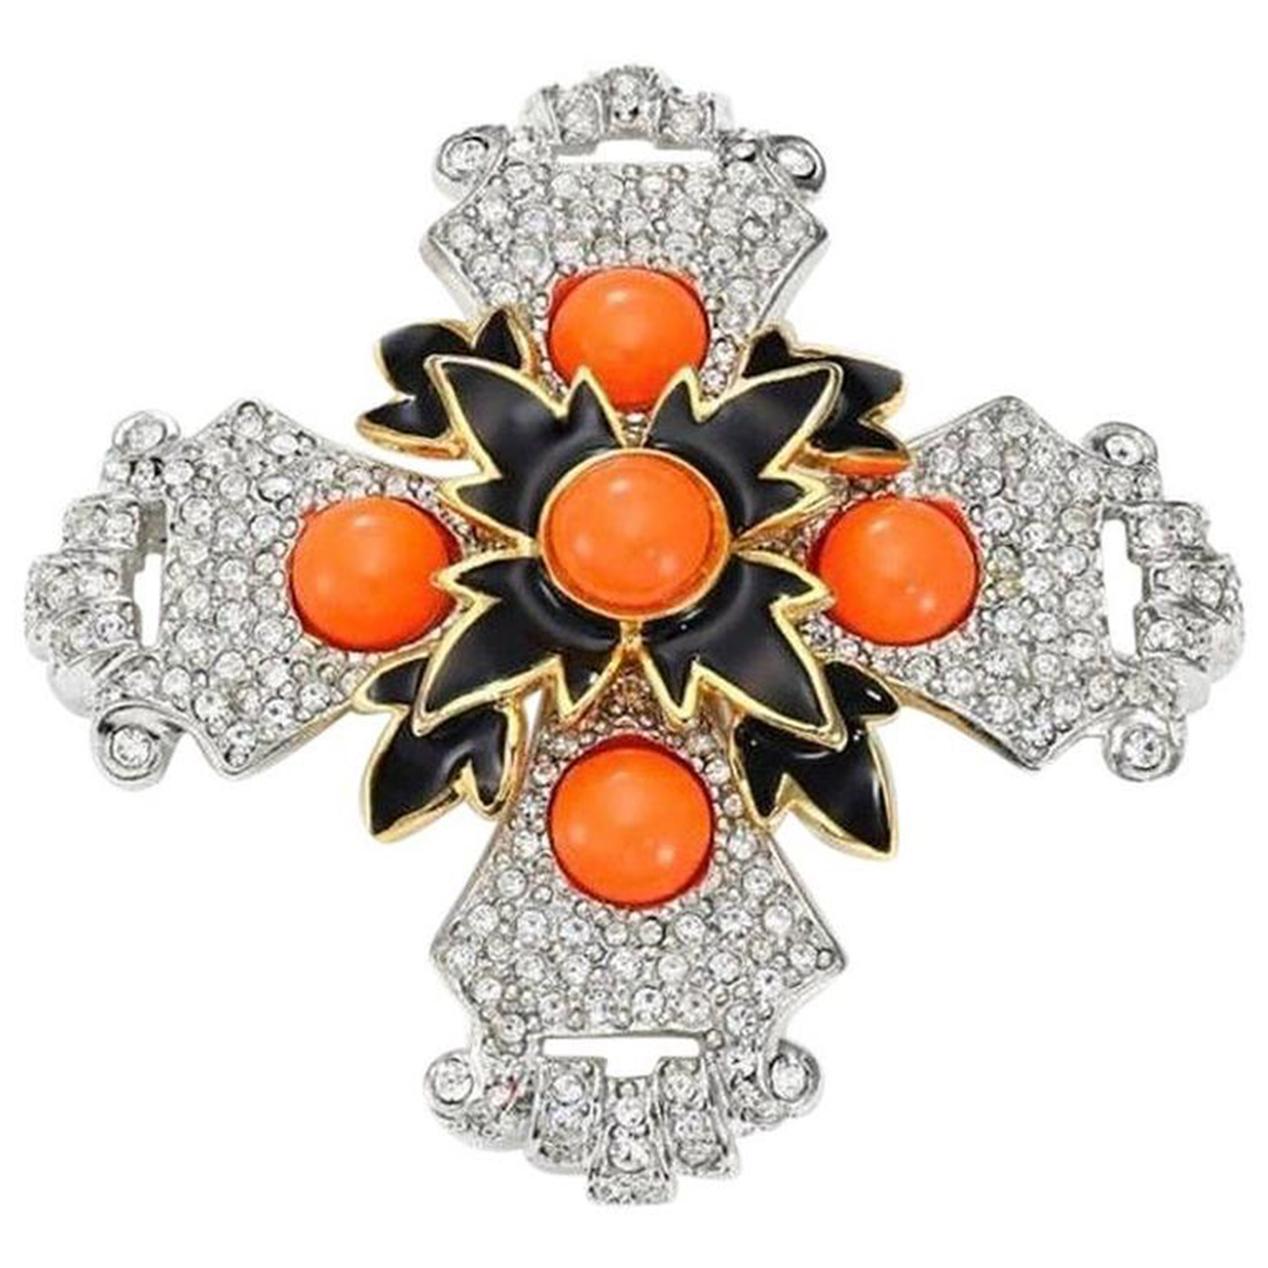 Kenneth Jay Lane Signed KJL MALTESE CROSS Pin Brooch Pendant Estate Find In Excellent Condition For Sale In Montreal, QC